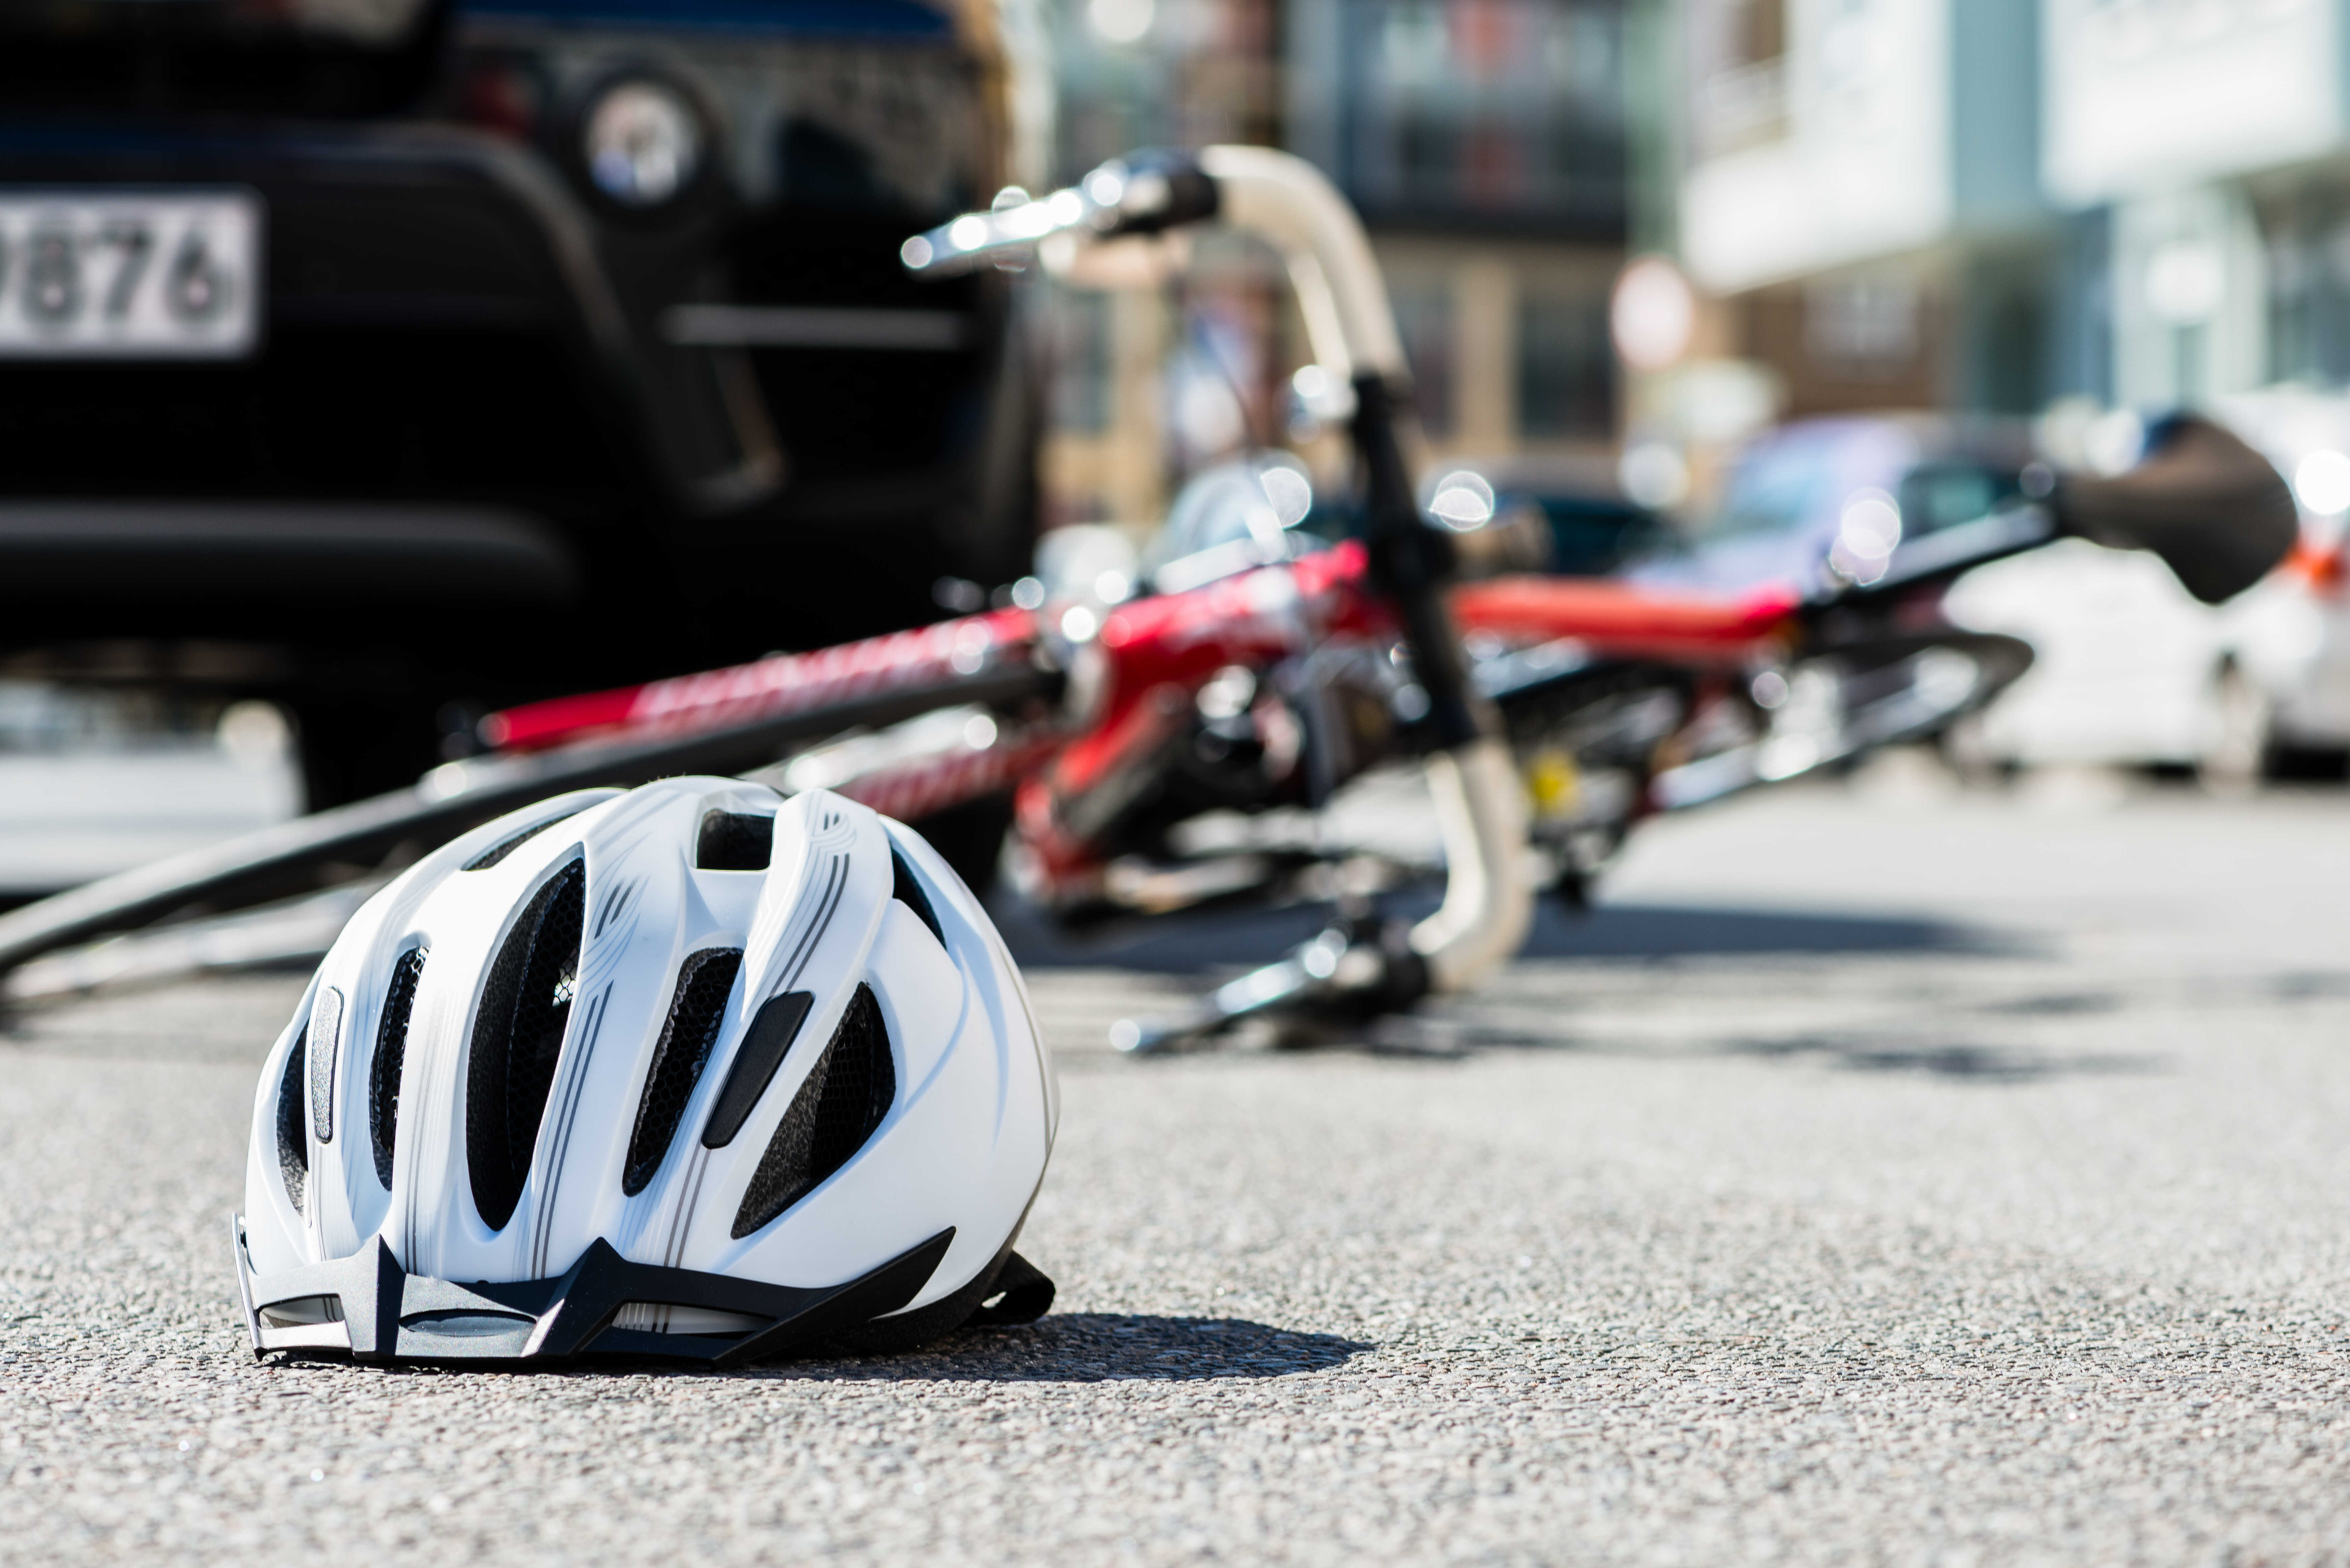 white bicycle helmet in front of overturned bicycle